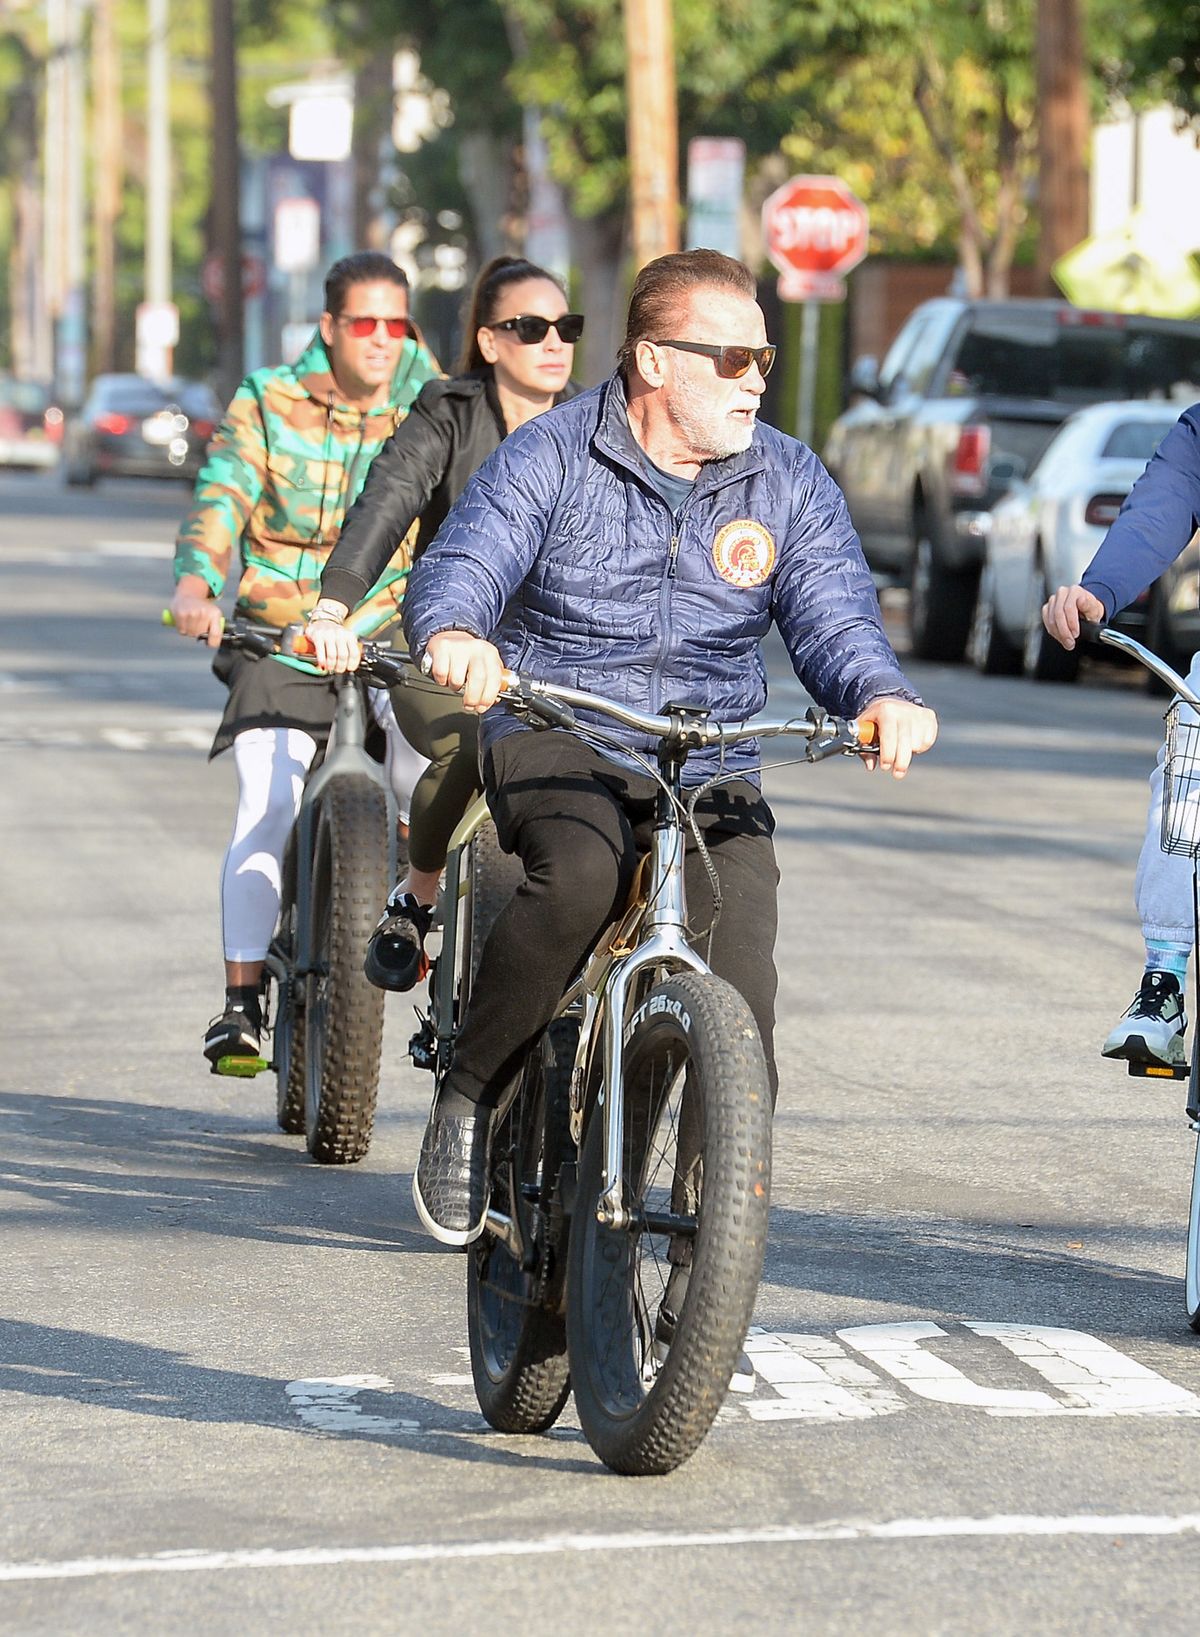 EXCLUSIVE: Arnold Schwarzenegger Spotted For The First Time Since Cyclist Lawsuit in Los Angeles